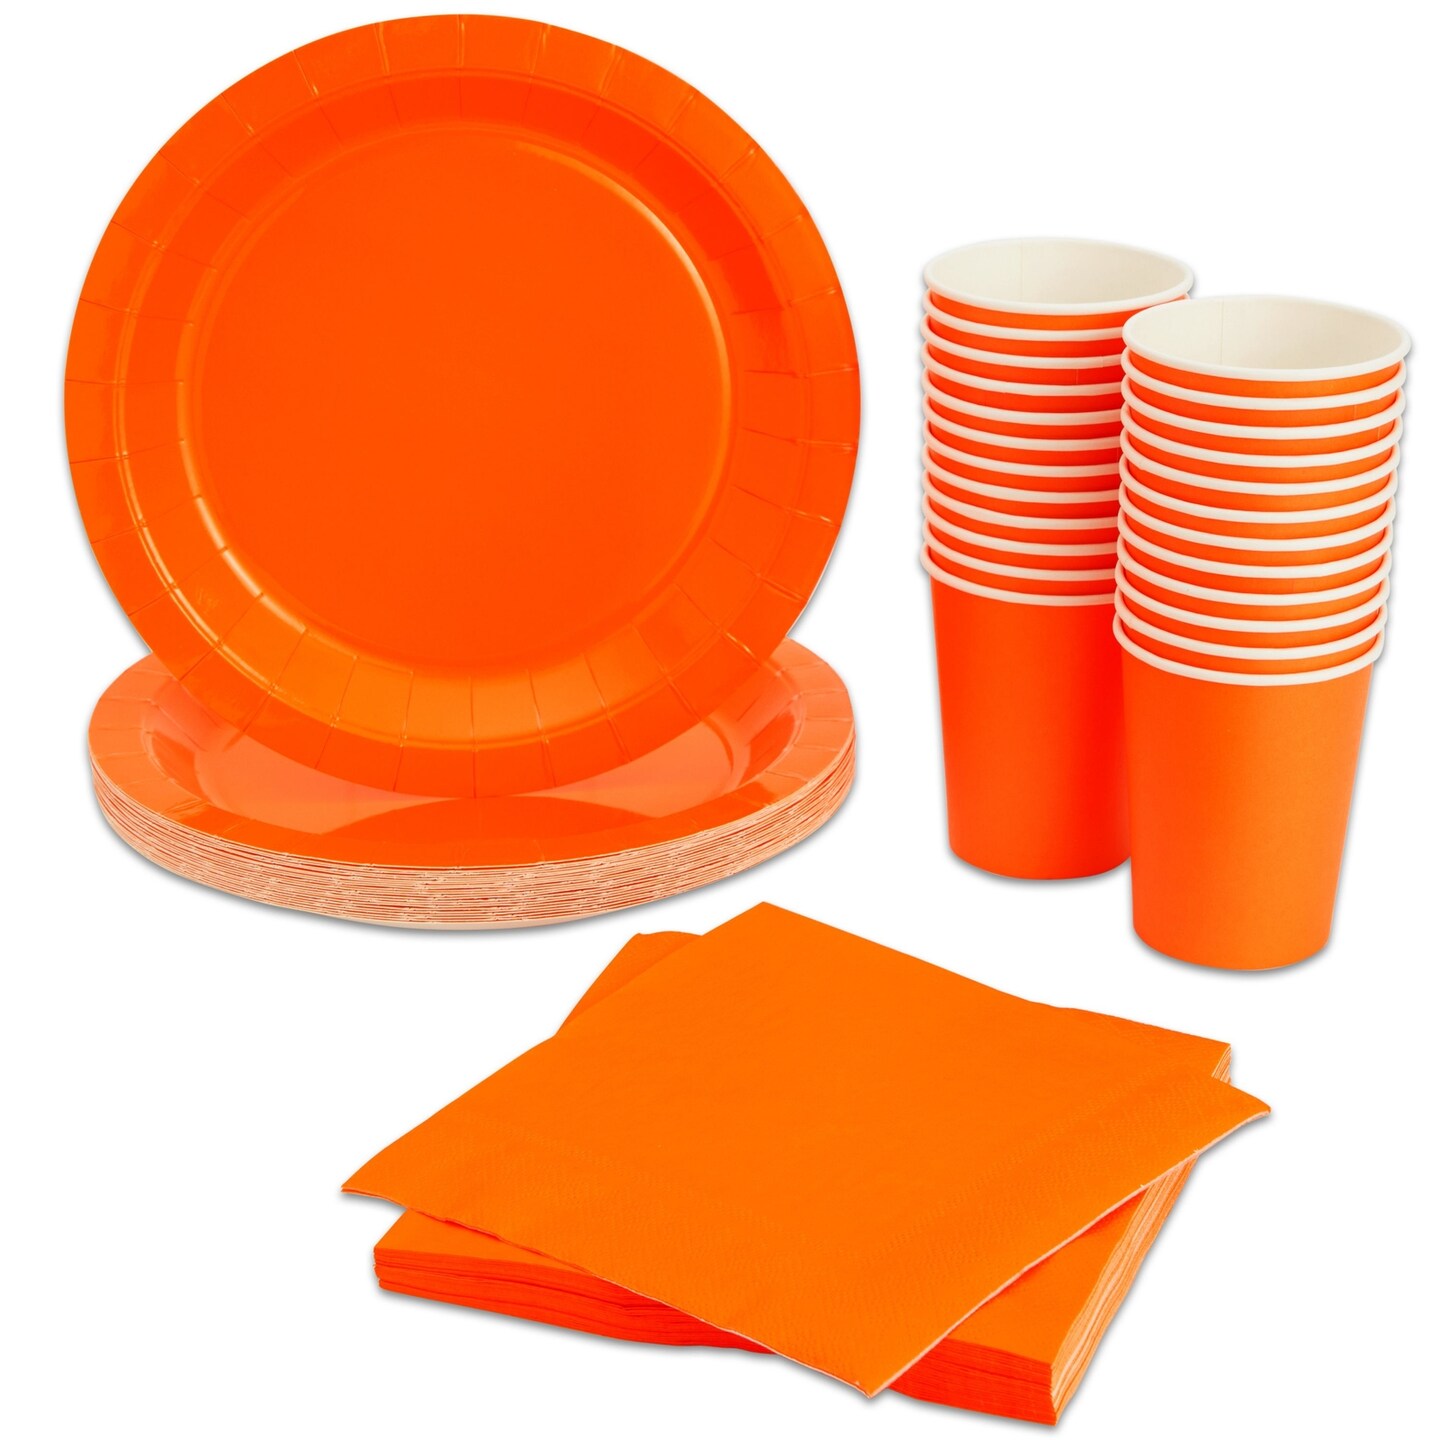 Serves 24 Orange Party Supplies with Paper Plates, Cups, and Napkins for Birthday, Picnic, Summer Events (72 Pieces)